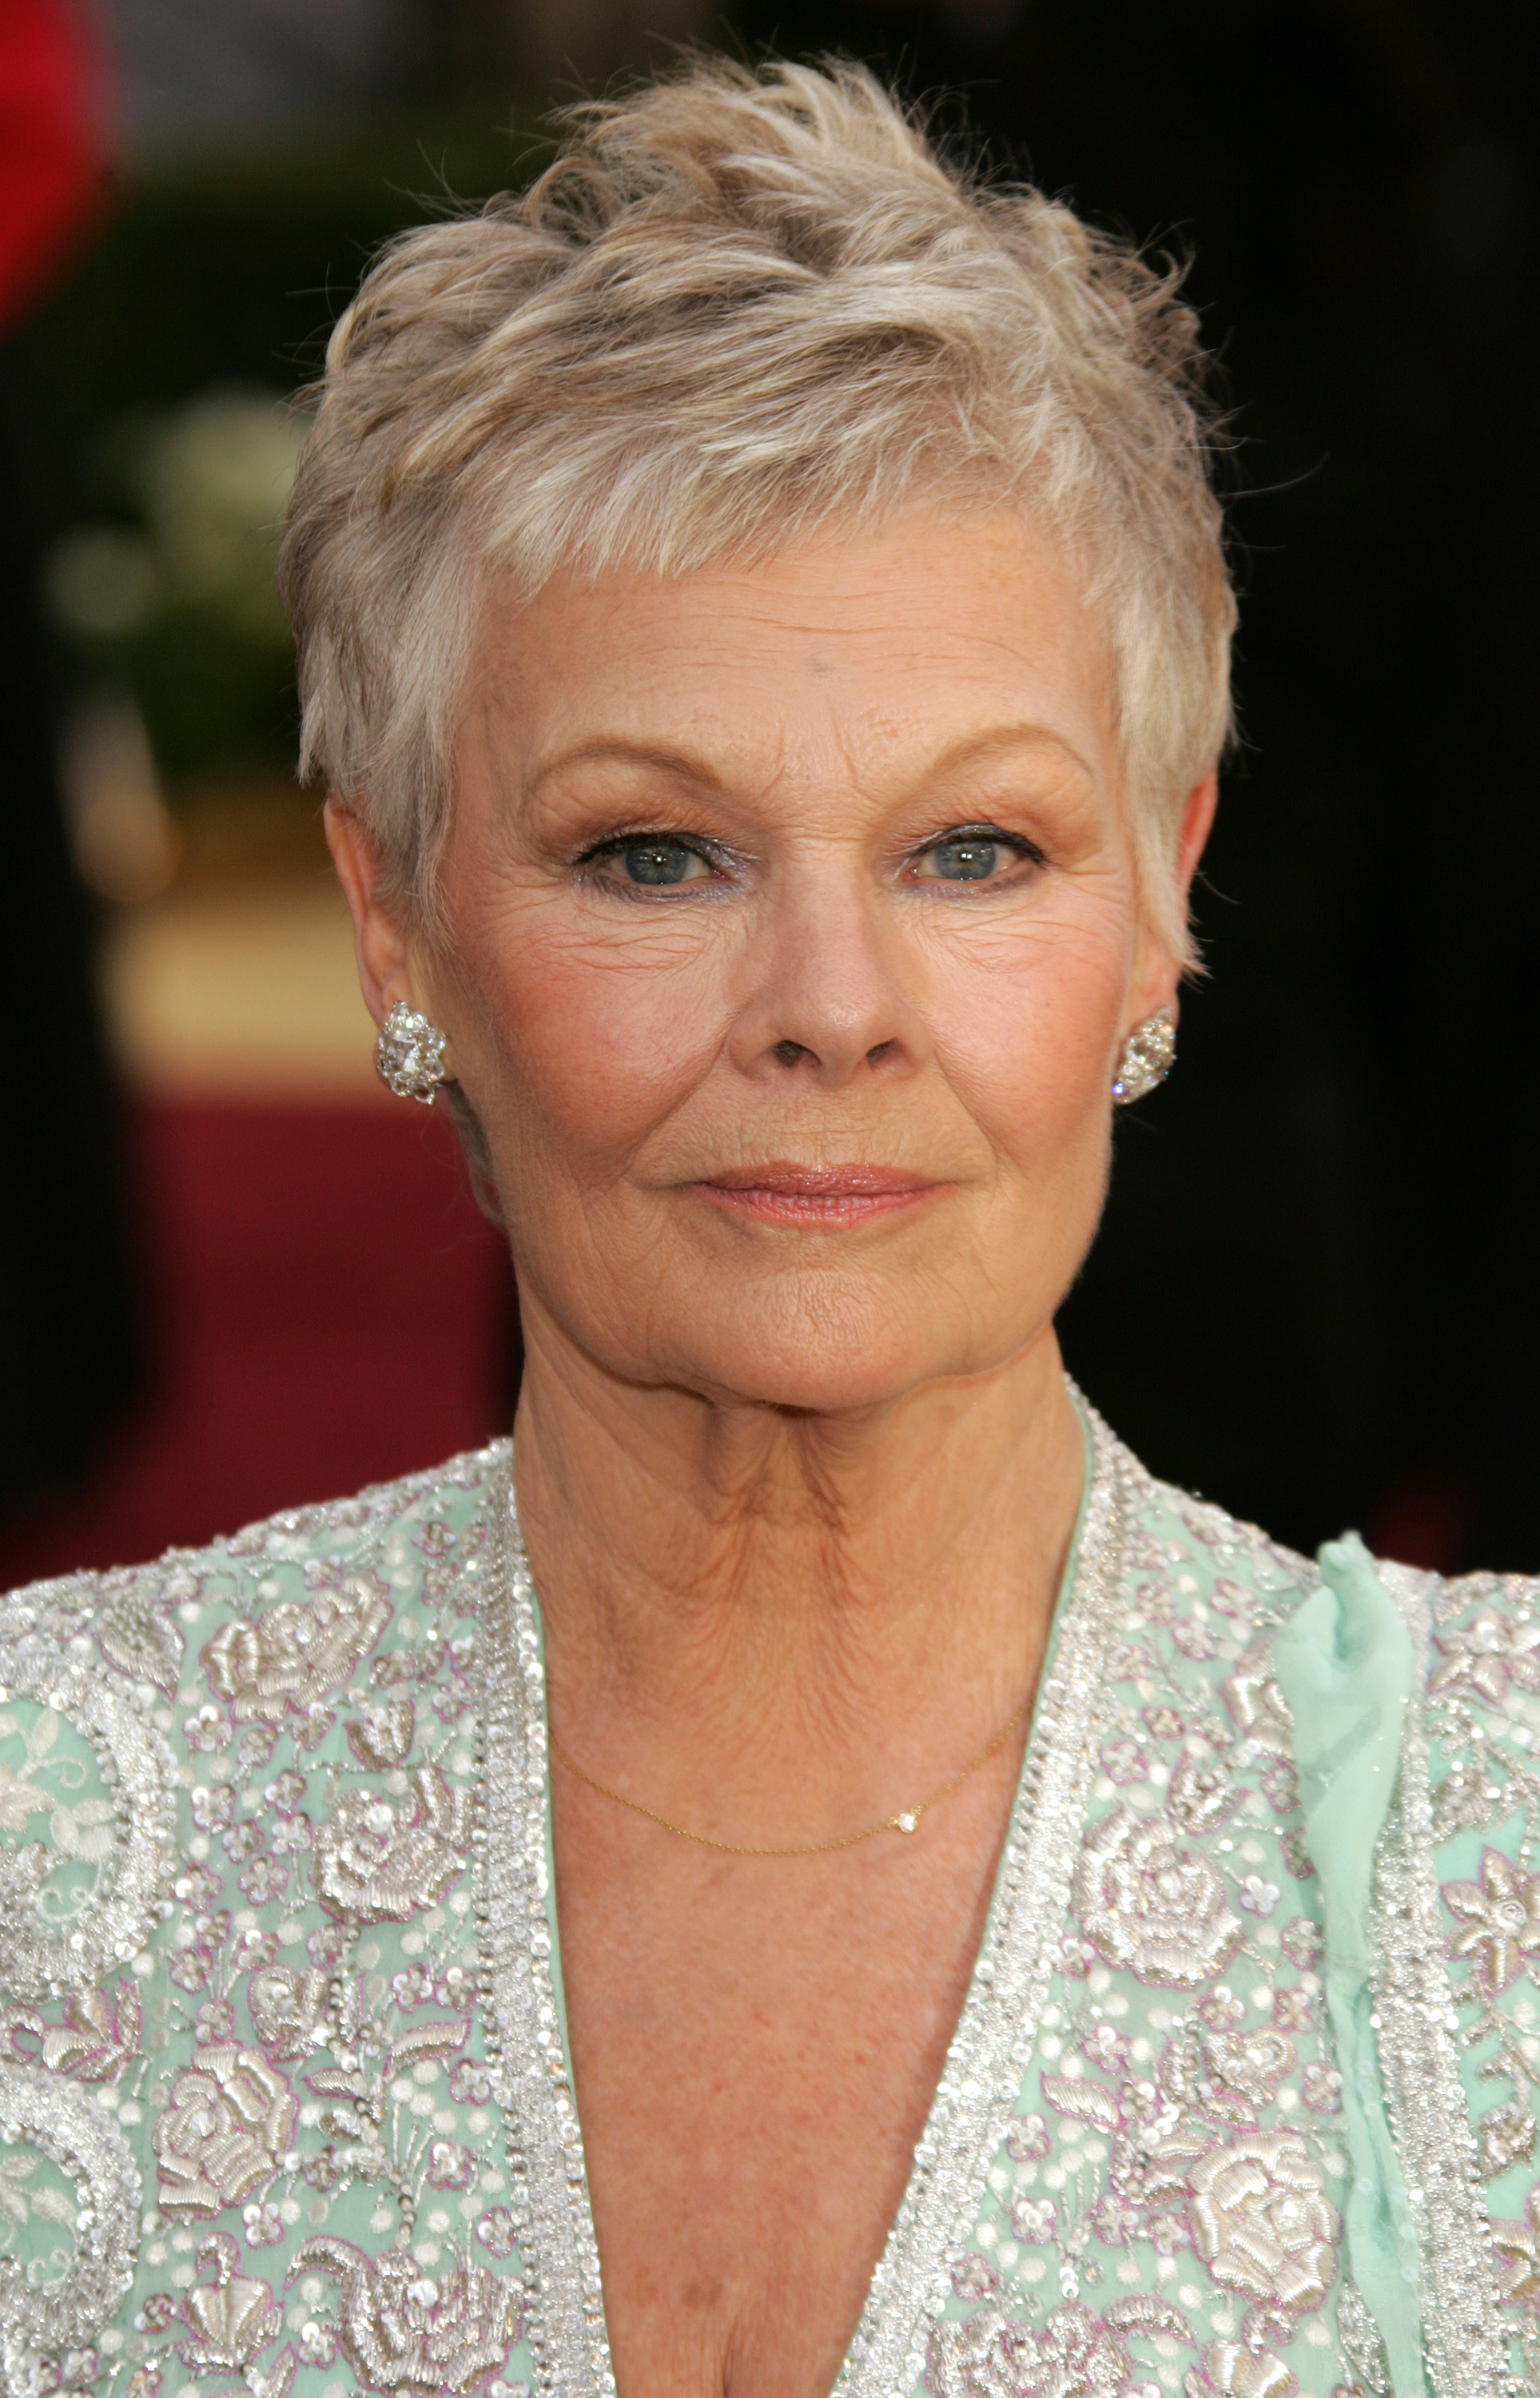 Judi Dench at the The 78th Annual Academy Awards - Arrivals, on March 5, 2006. | Source: Getty Images